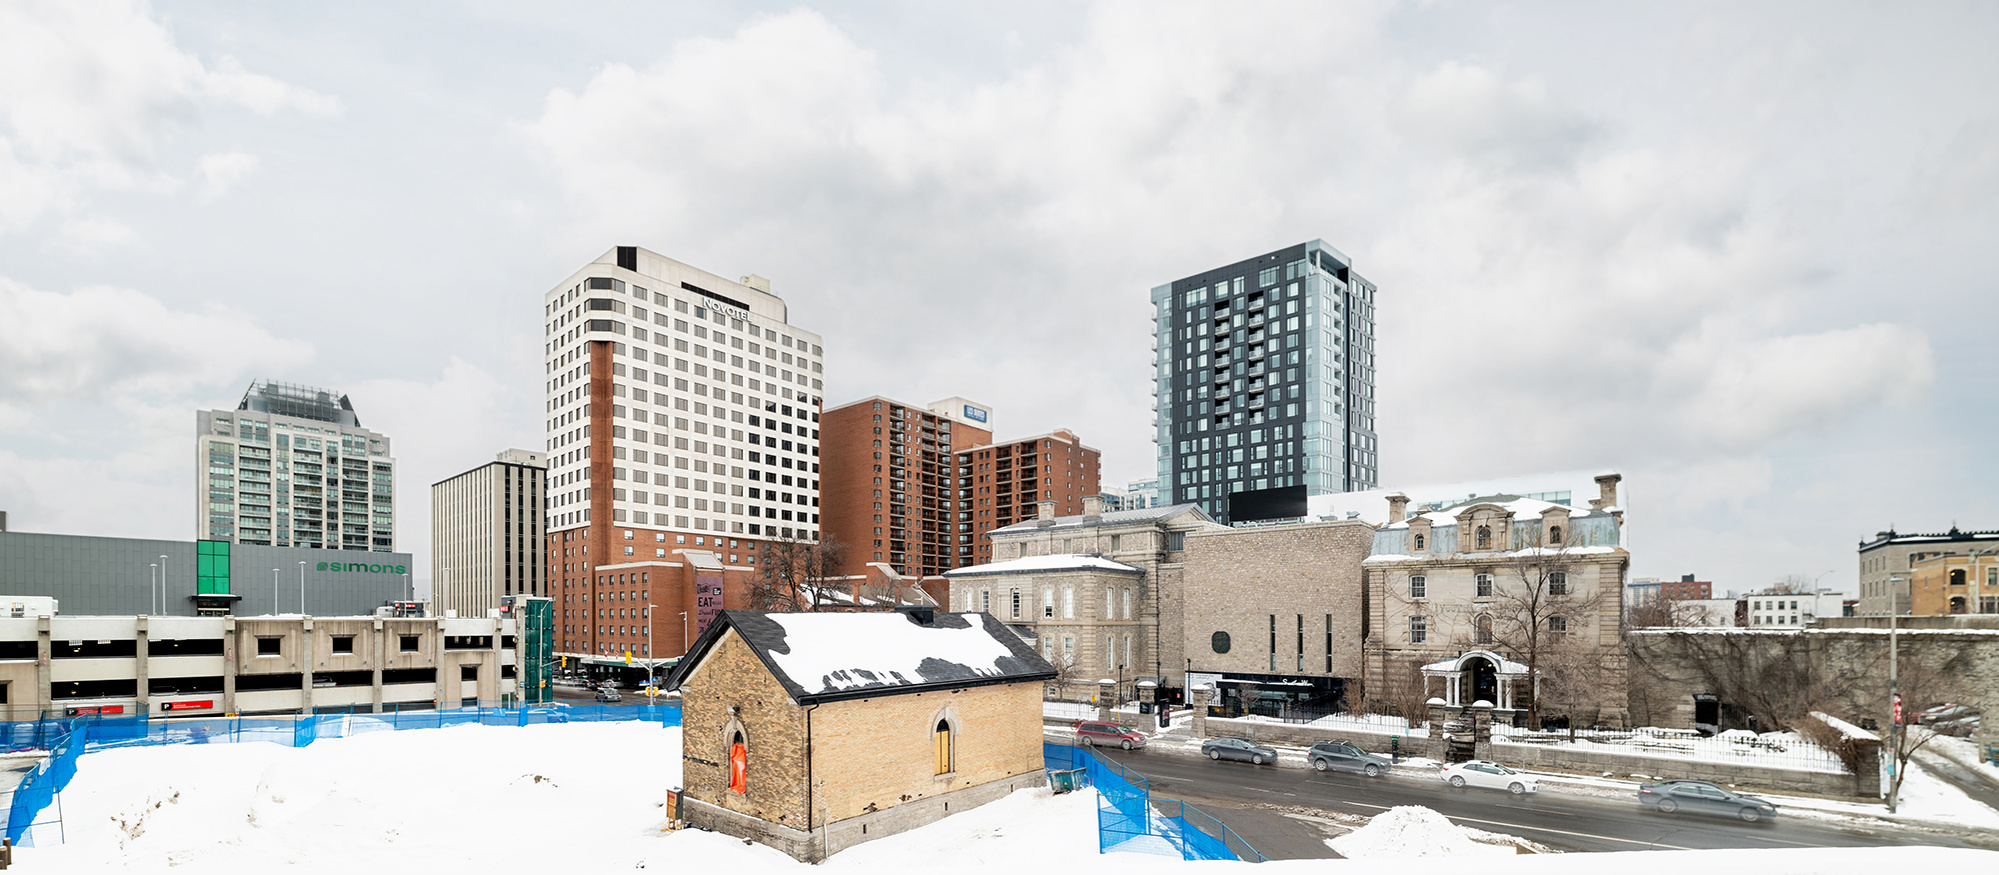 Panoramic image of Simons, Novotel and Youth Hostel in Ottawa in winter by Frank Fenn Architectural Photographer